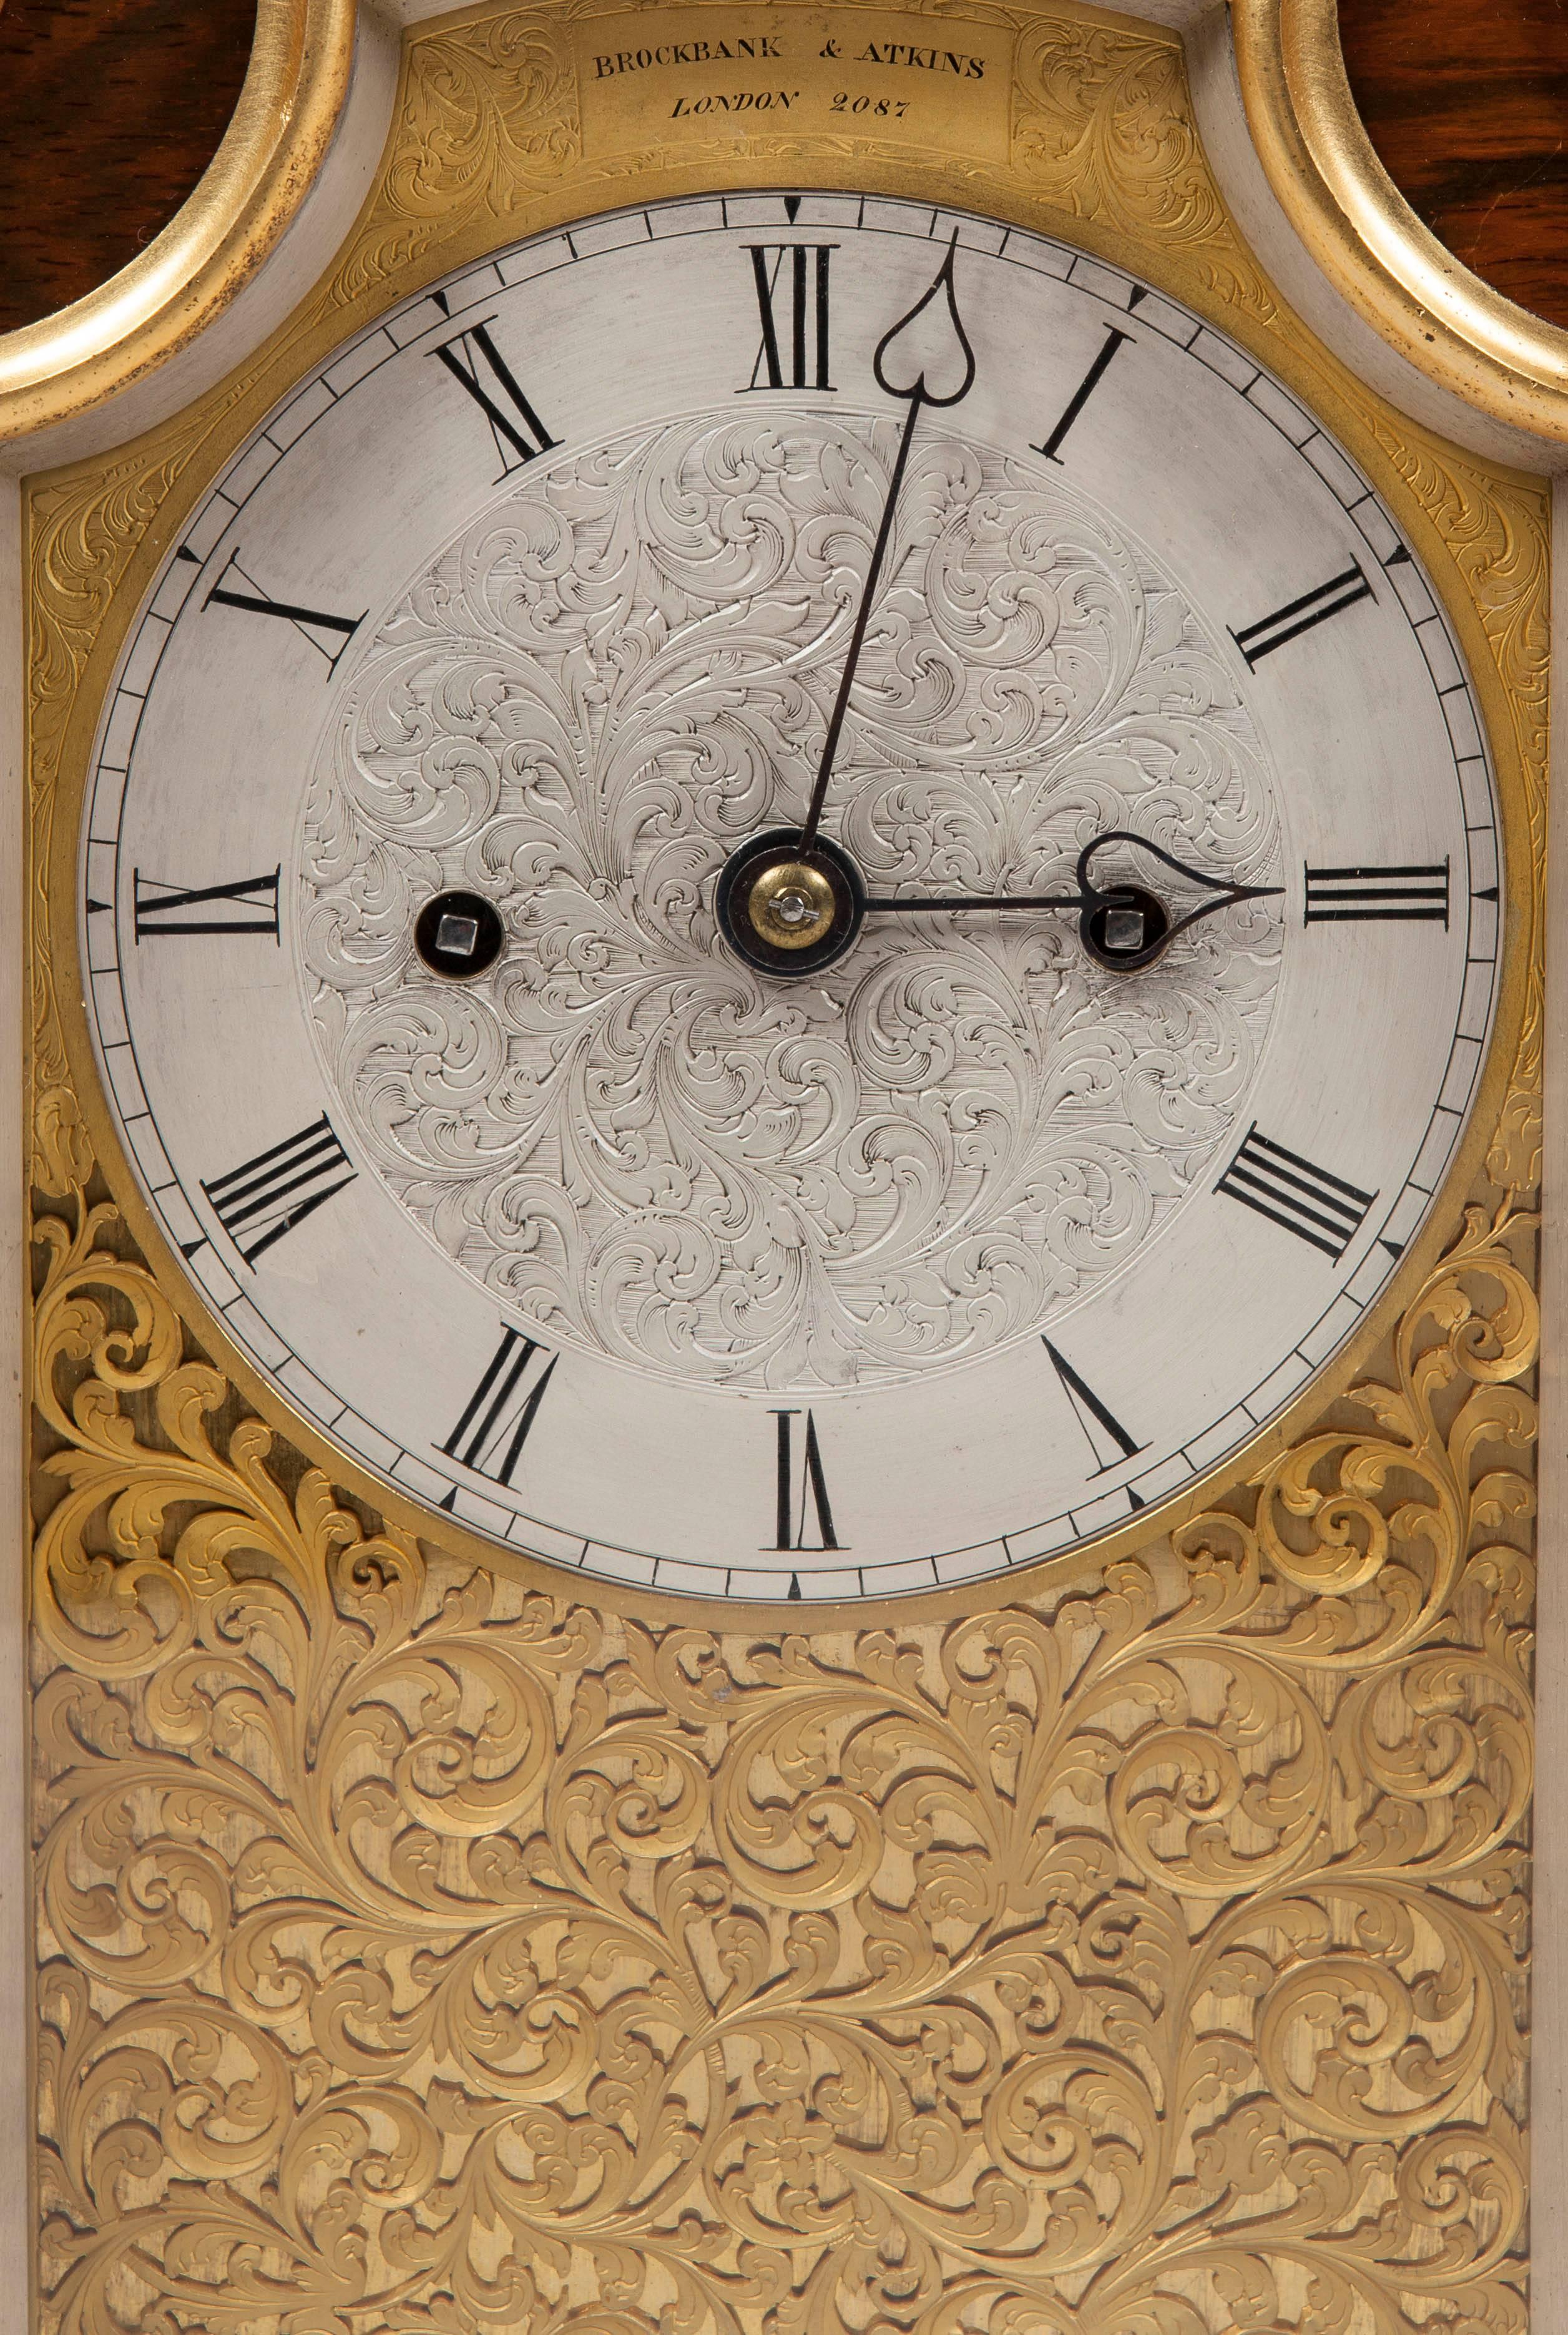 A table clock by Brockbank and Atkins of London

The finely marked goncalo alves case adorned with ormolu mounts, having foliate scroll feet, the top arched, and dressed with further ormolu scrolls and columns to the fascia, with glass side